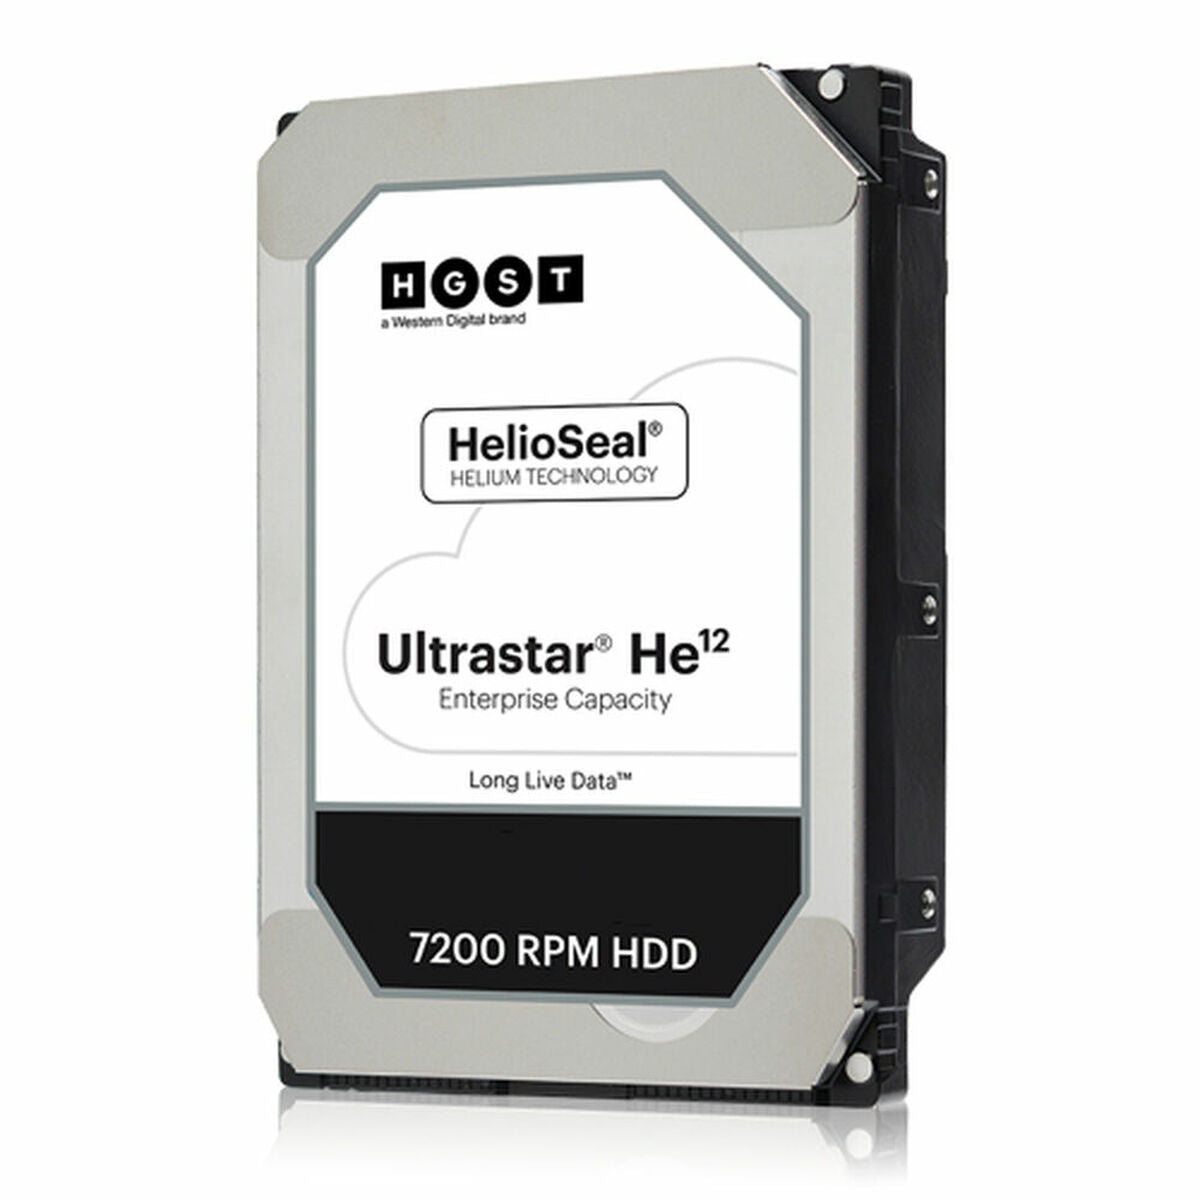 Hard Drive Western Digital 0F30144 12 TB 3,5", Western Digital, Computing, Data storage, hard-drive-western-digital-0f30144-12-tb-3-5, Brand_Western Digital, category-reference-2609, category-reference-2803, category-reference-2806, category-reference-t-19685, category-reference-t-19909, category-reference-t-21357, computers / components, Condition_NEW, Price_400 - 500, RiotNook